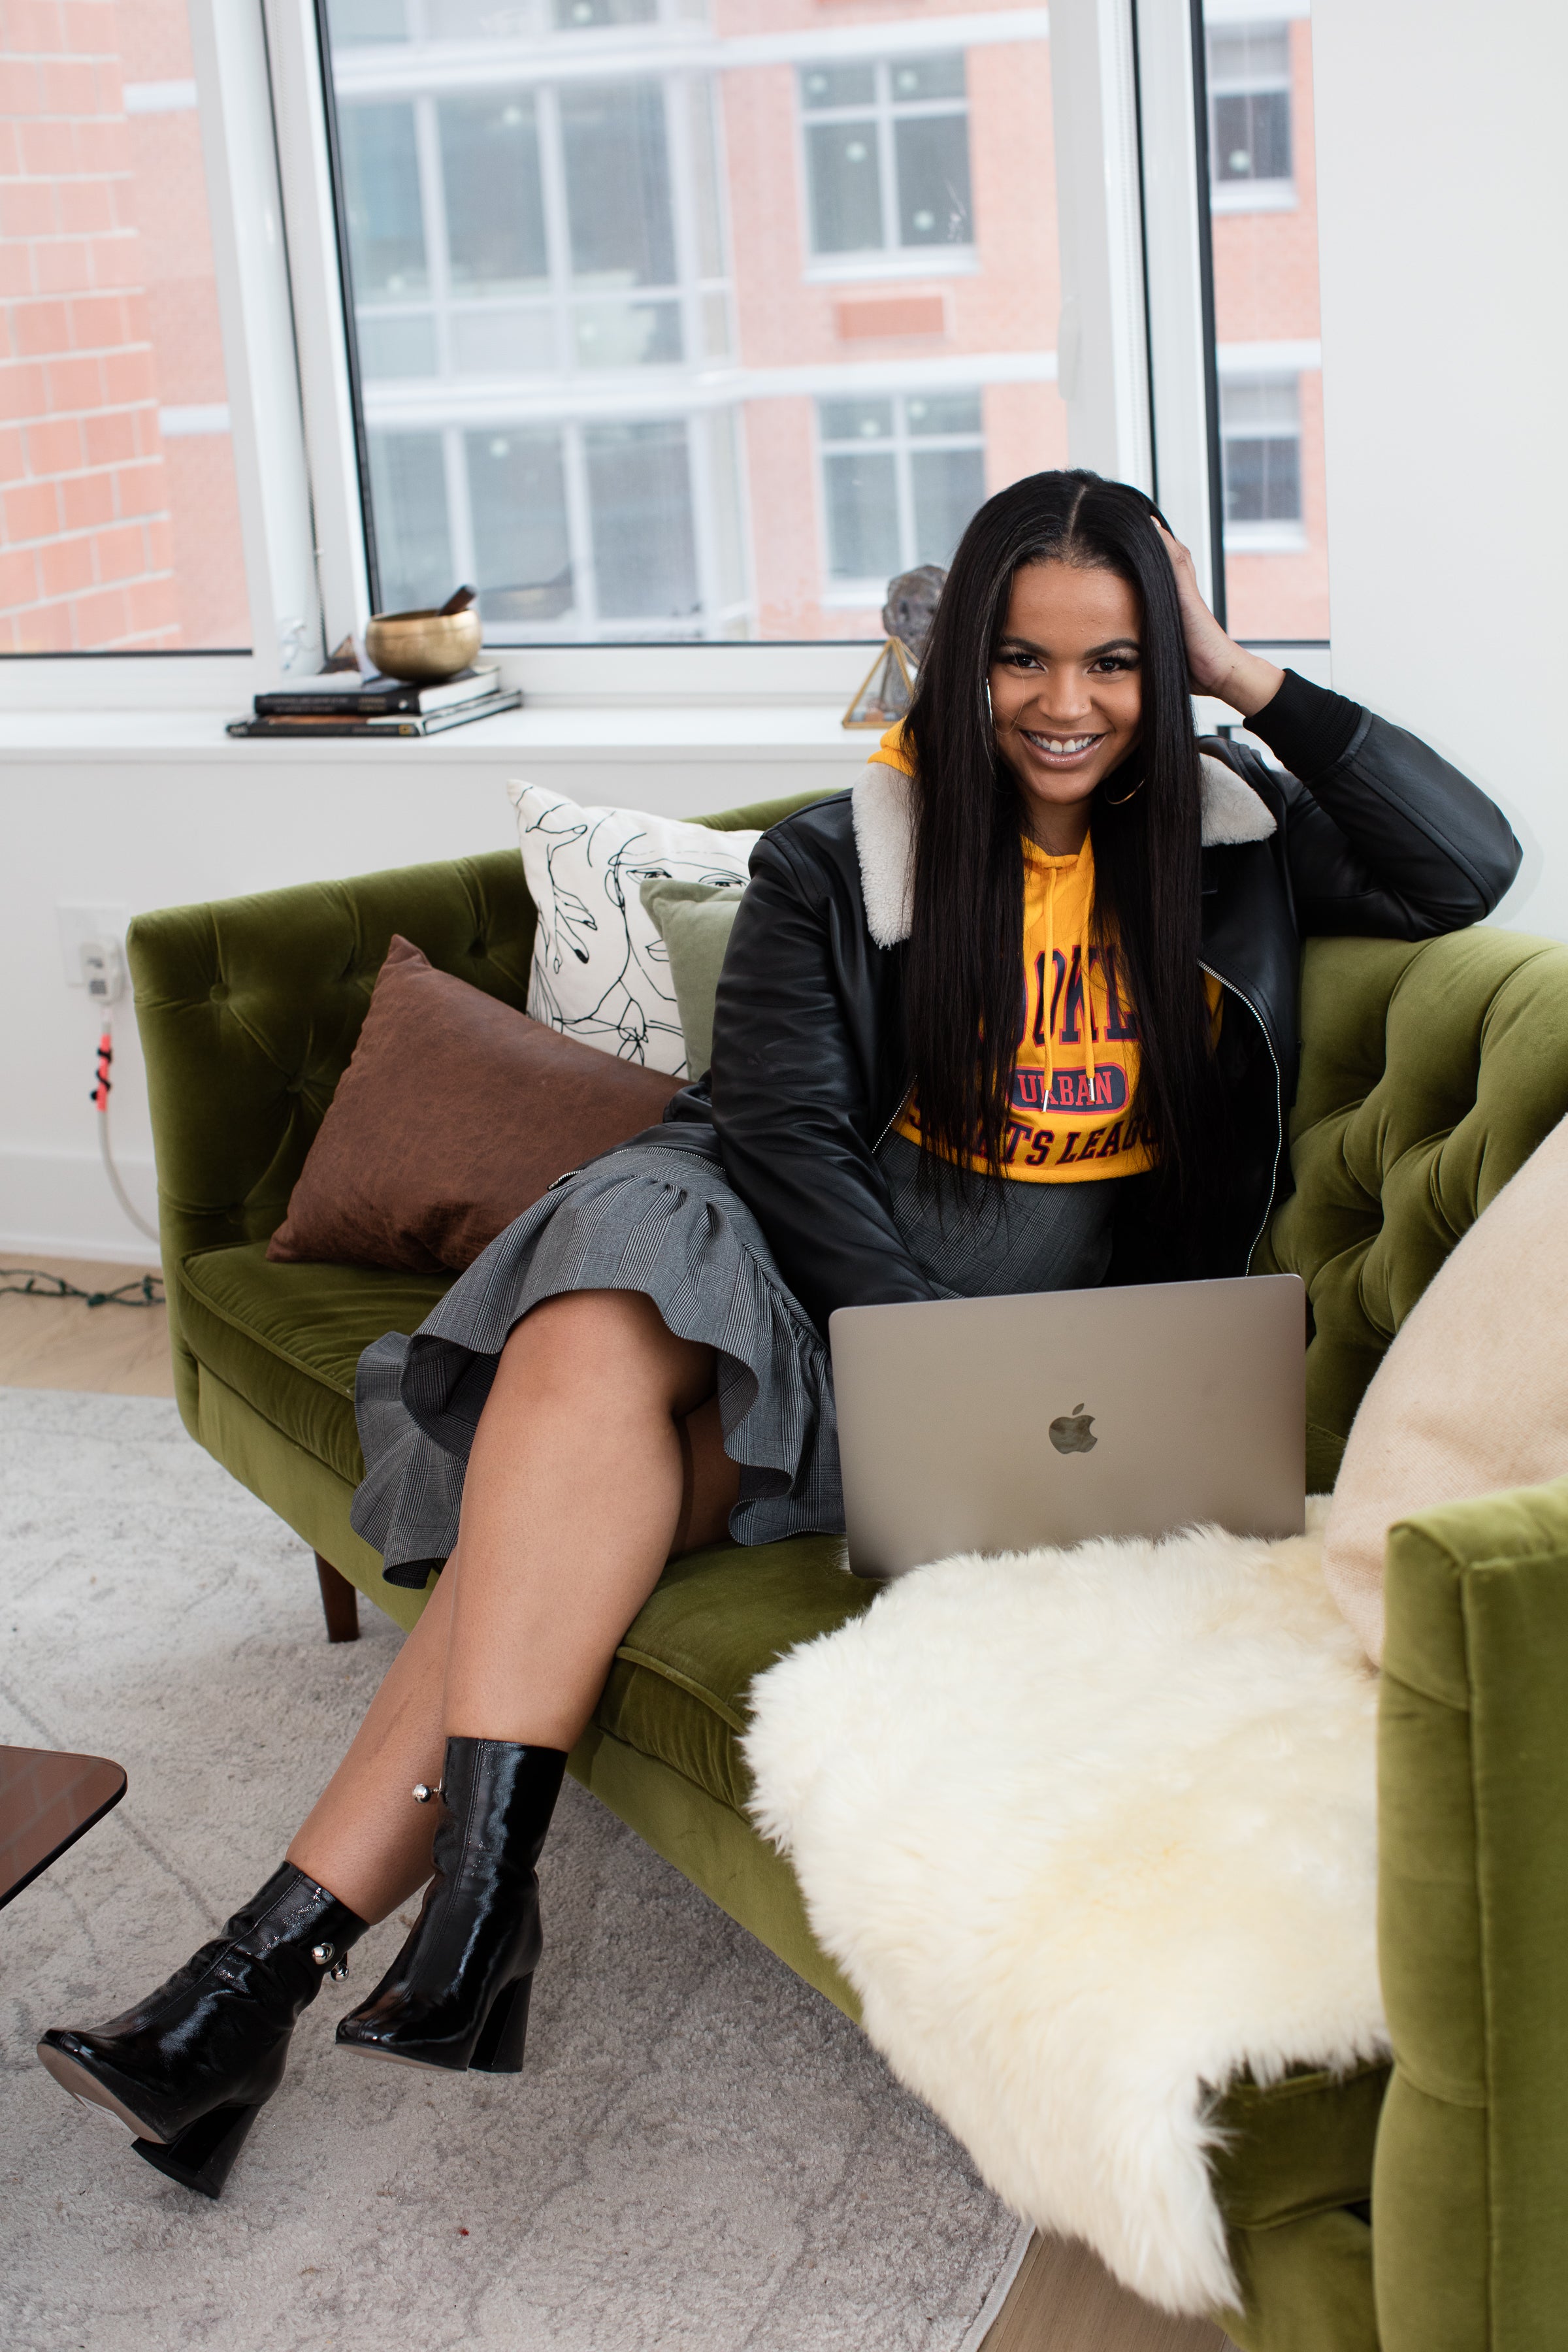 How She Did It: 'I Launched A Thriving Online Community That Helps Young Women Win'